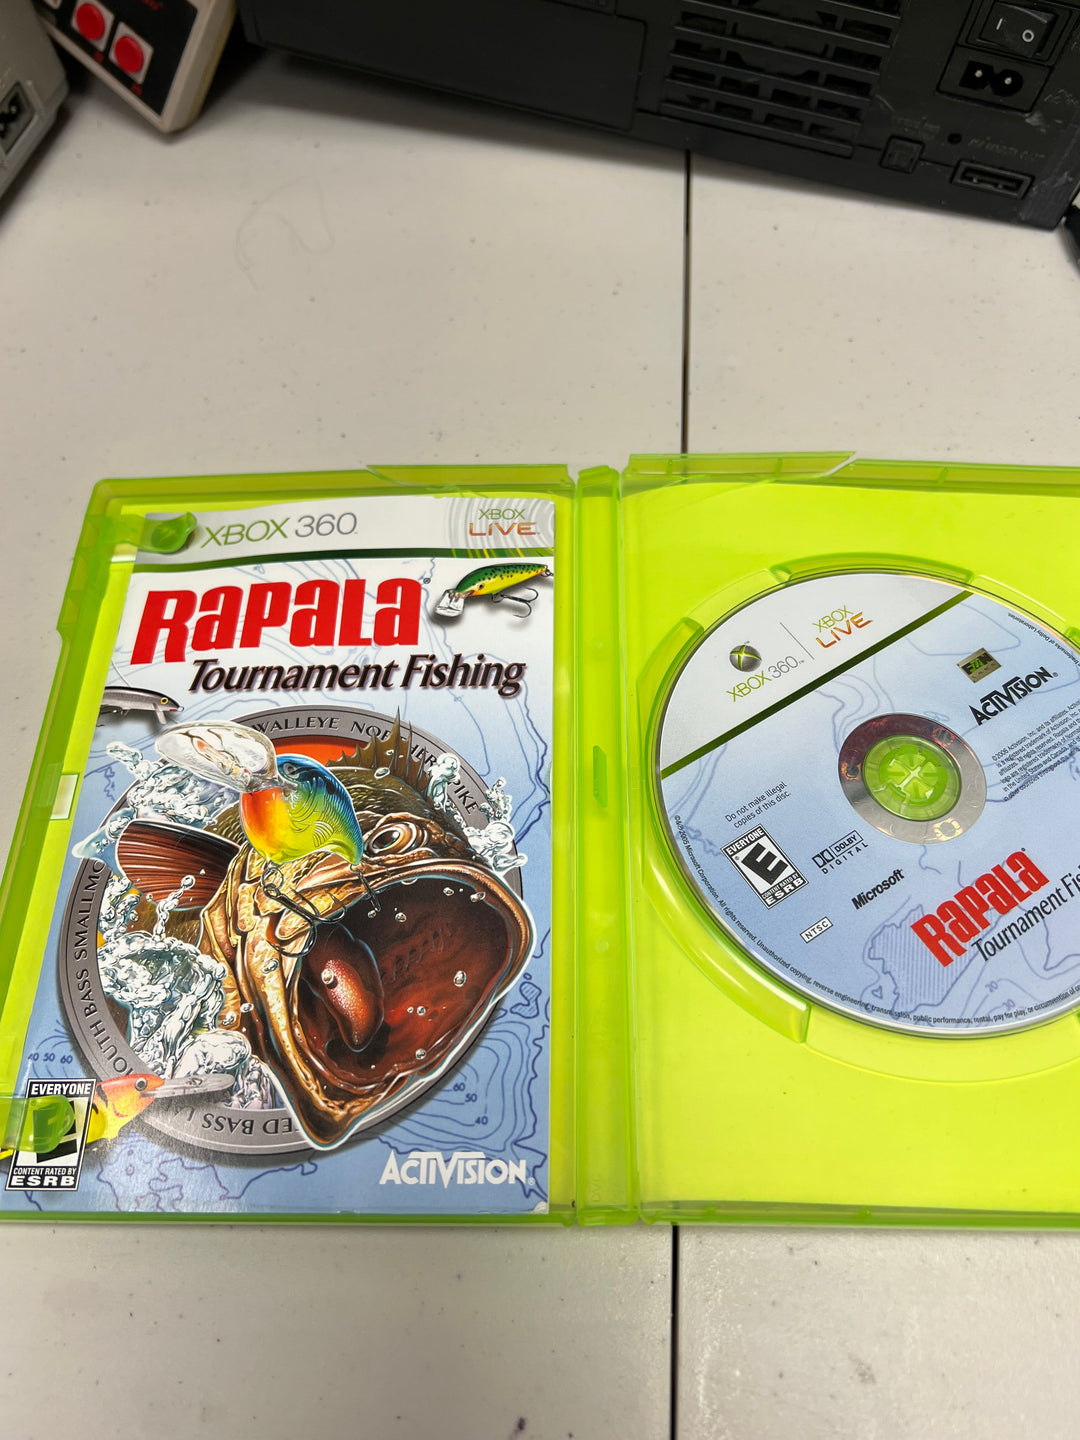 Rapala Tournament Fishing for Microsoft Xbox 360 in case. Tested and working.     DO61024